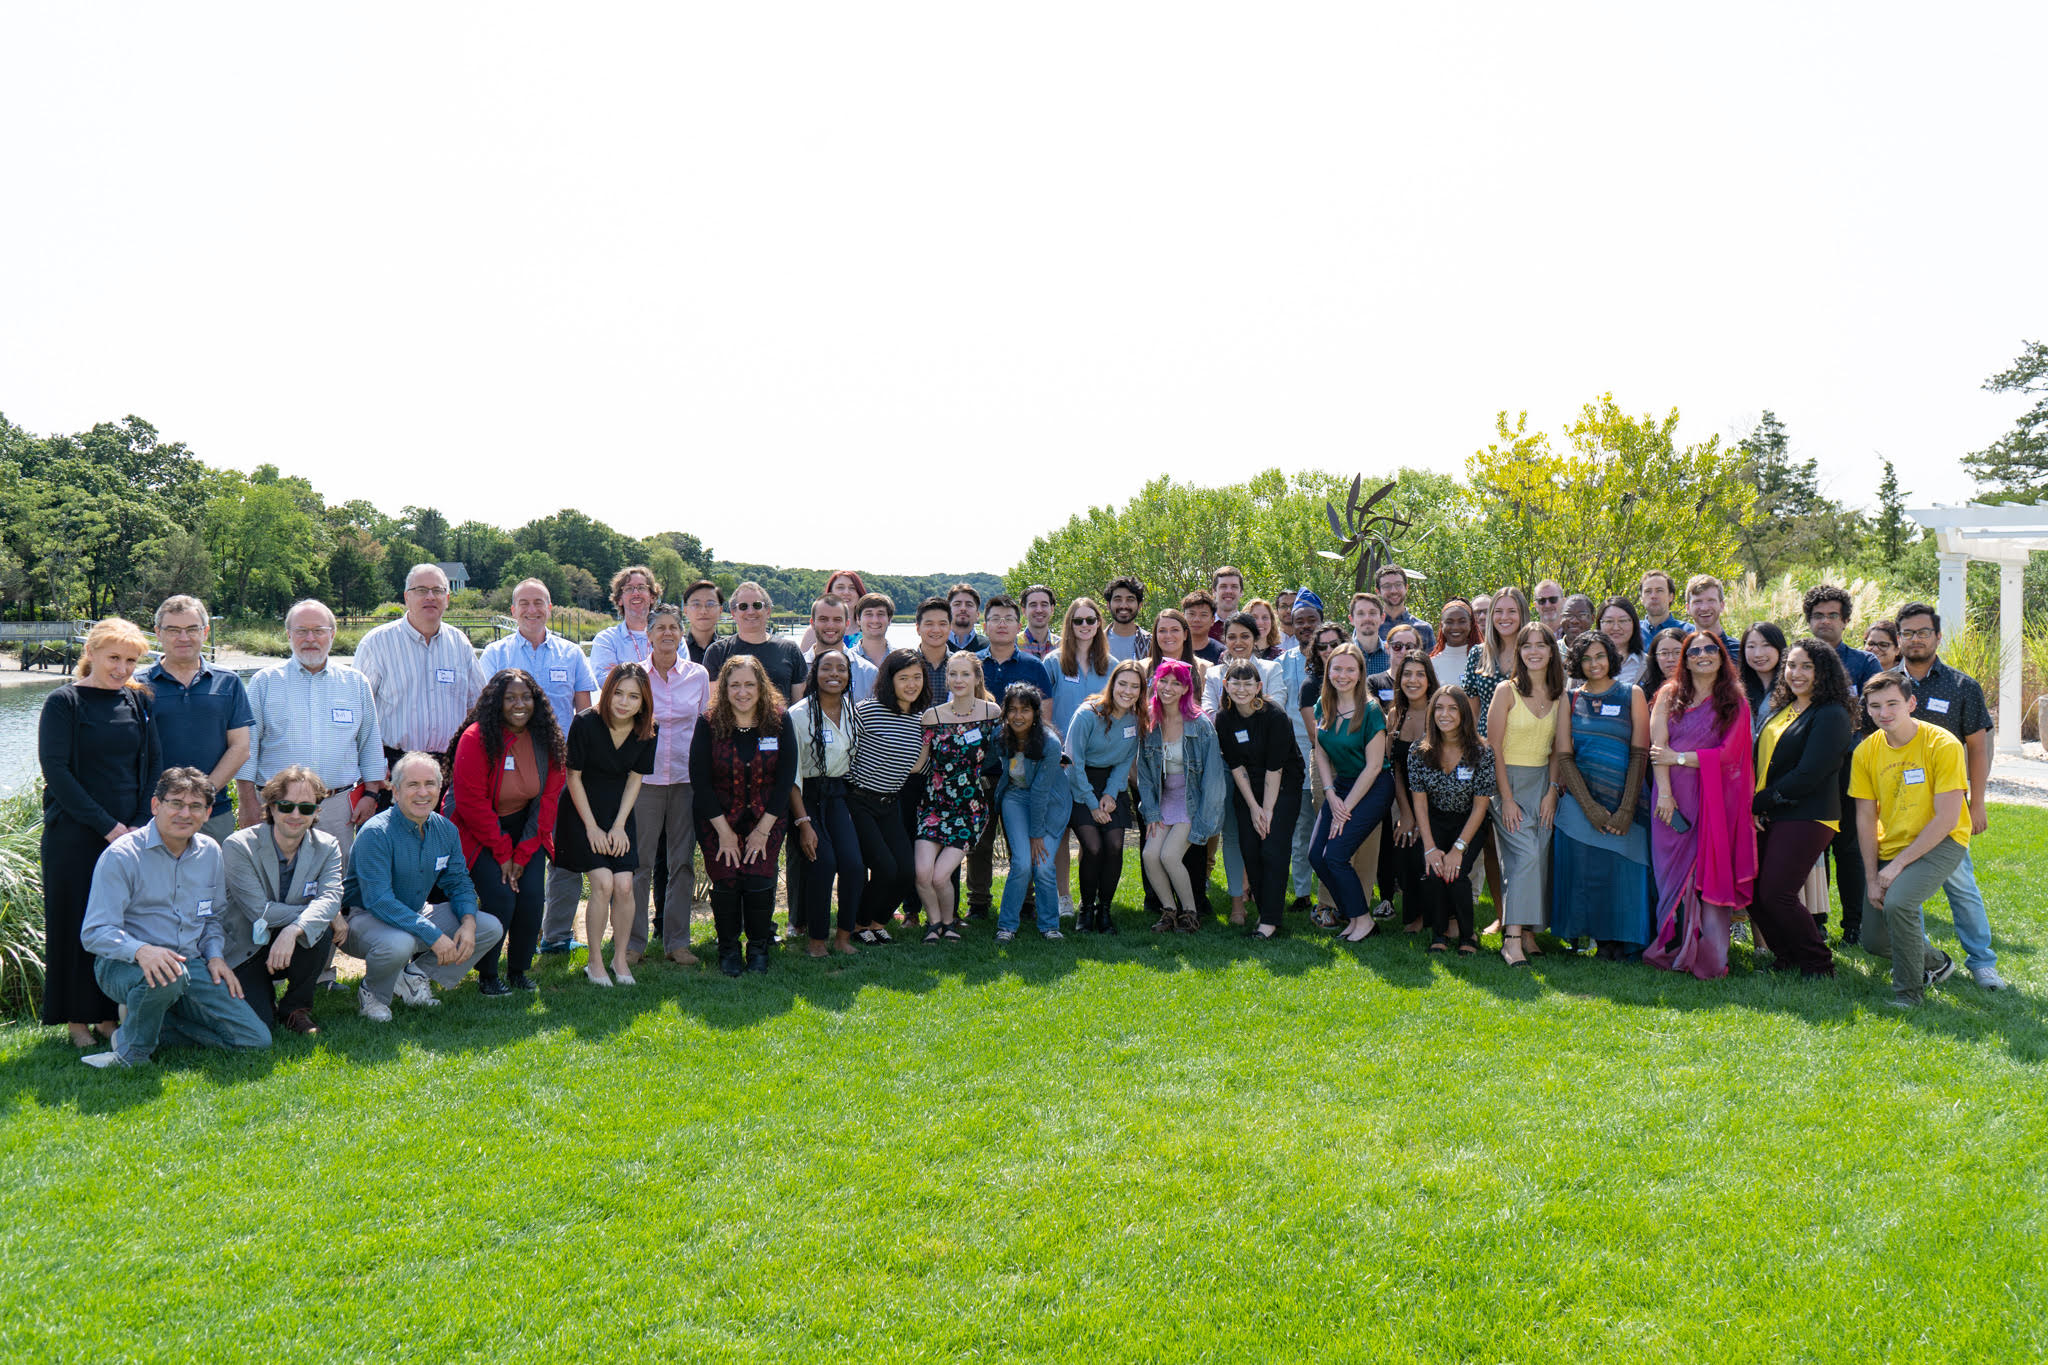 Group photo of the Department of Neurobiology and Behavior